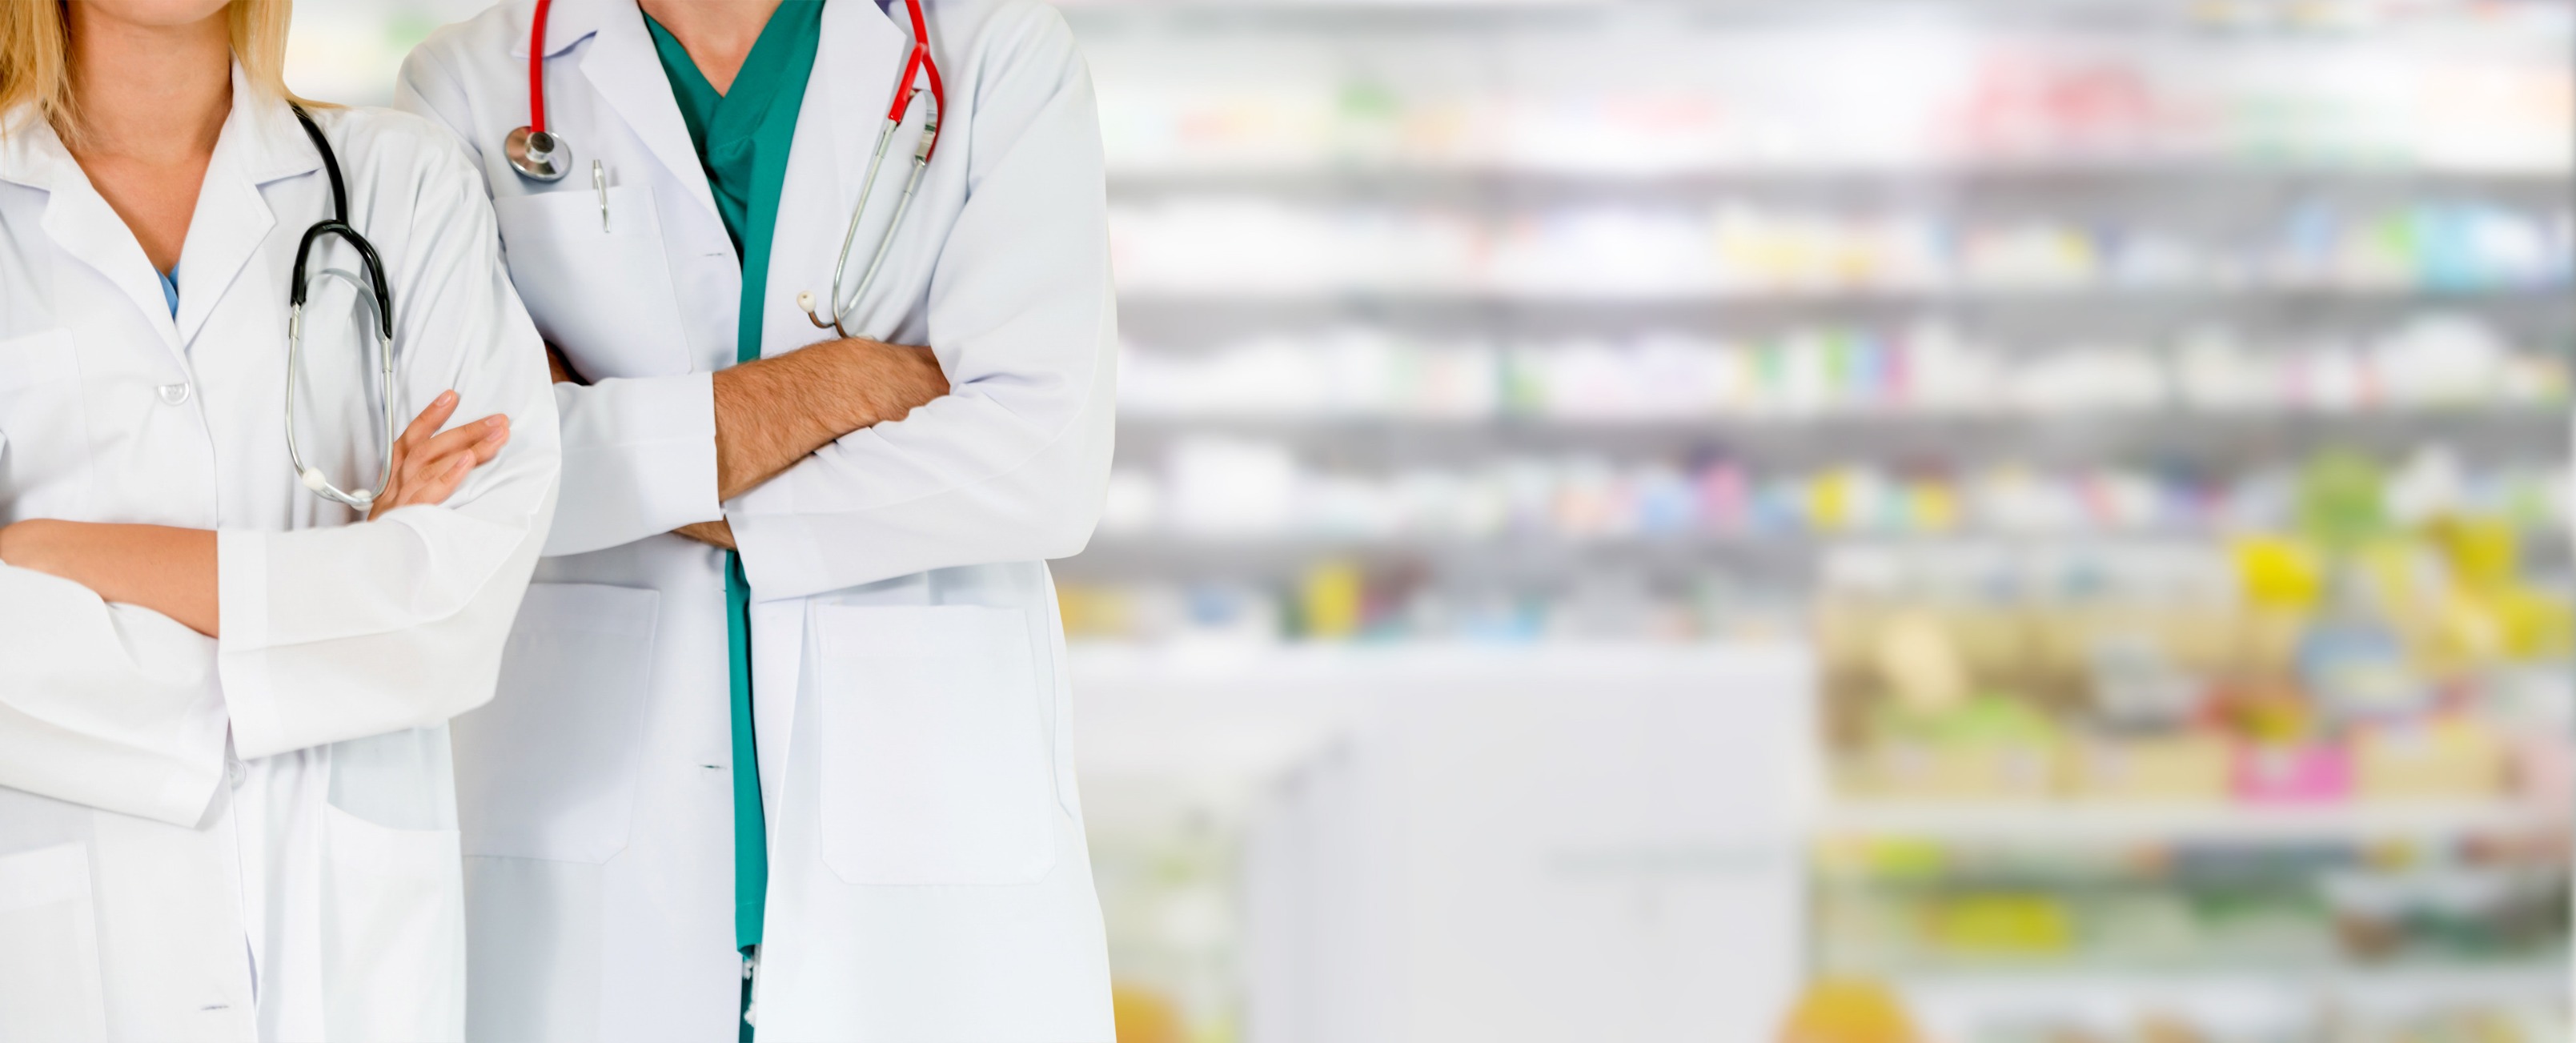 Professional services for pharmacies 0